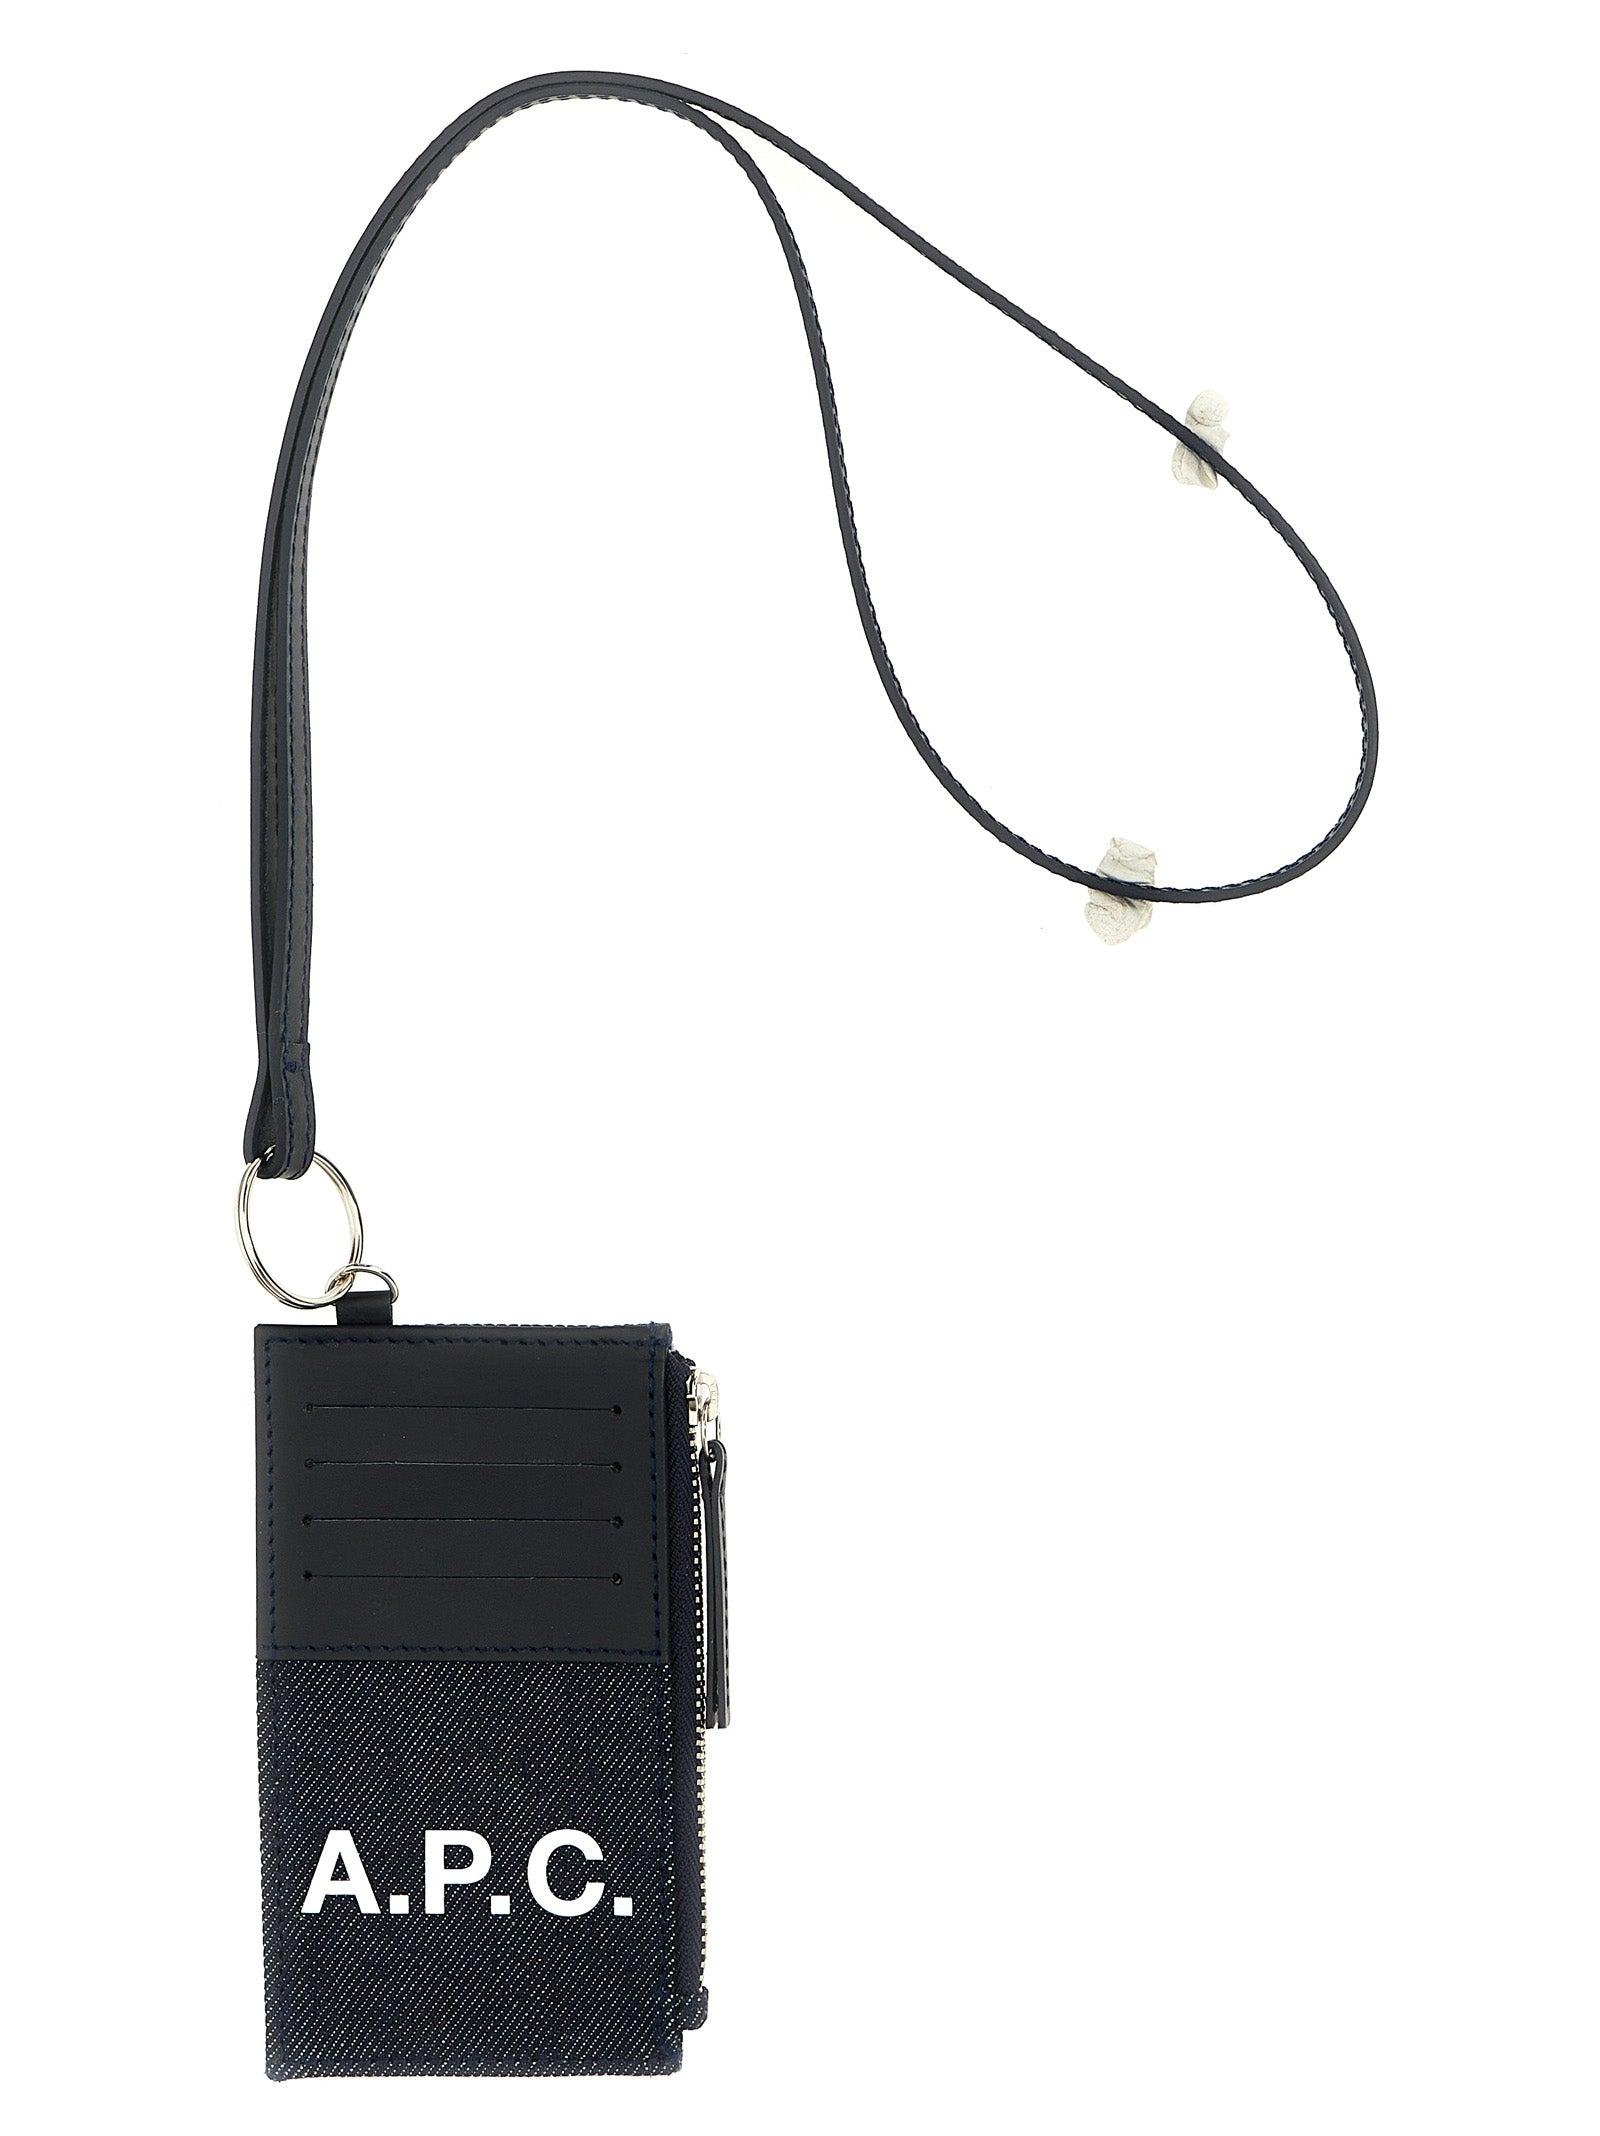 A.P.C. Axelle Wallets, Card Holders in White | Lyst